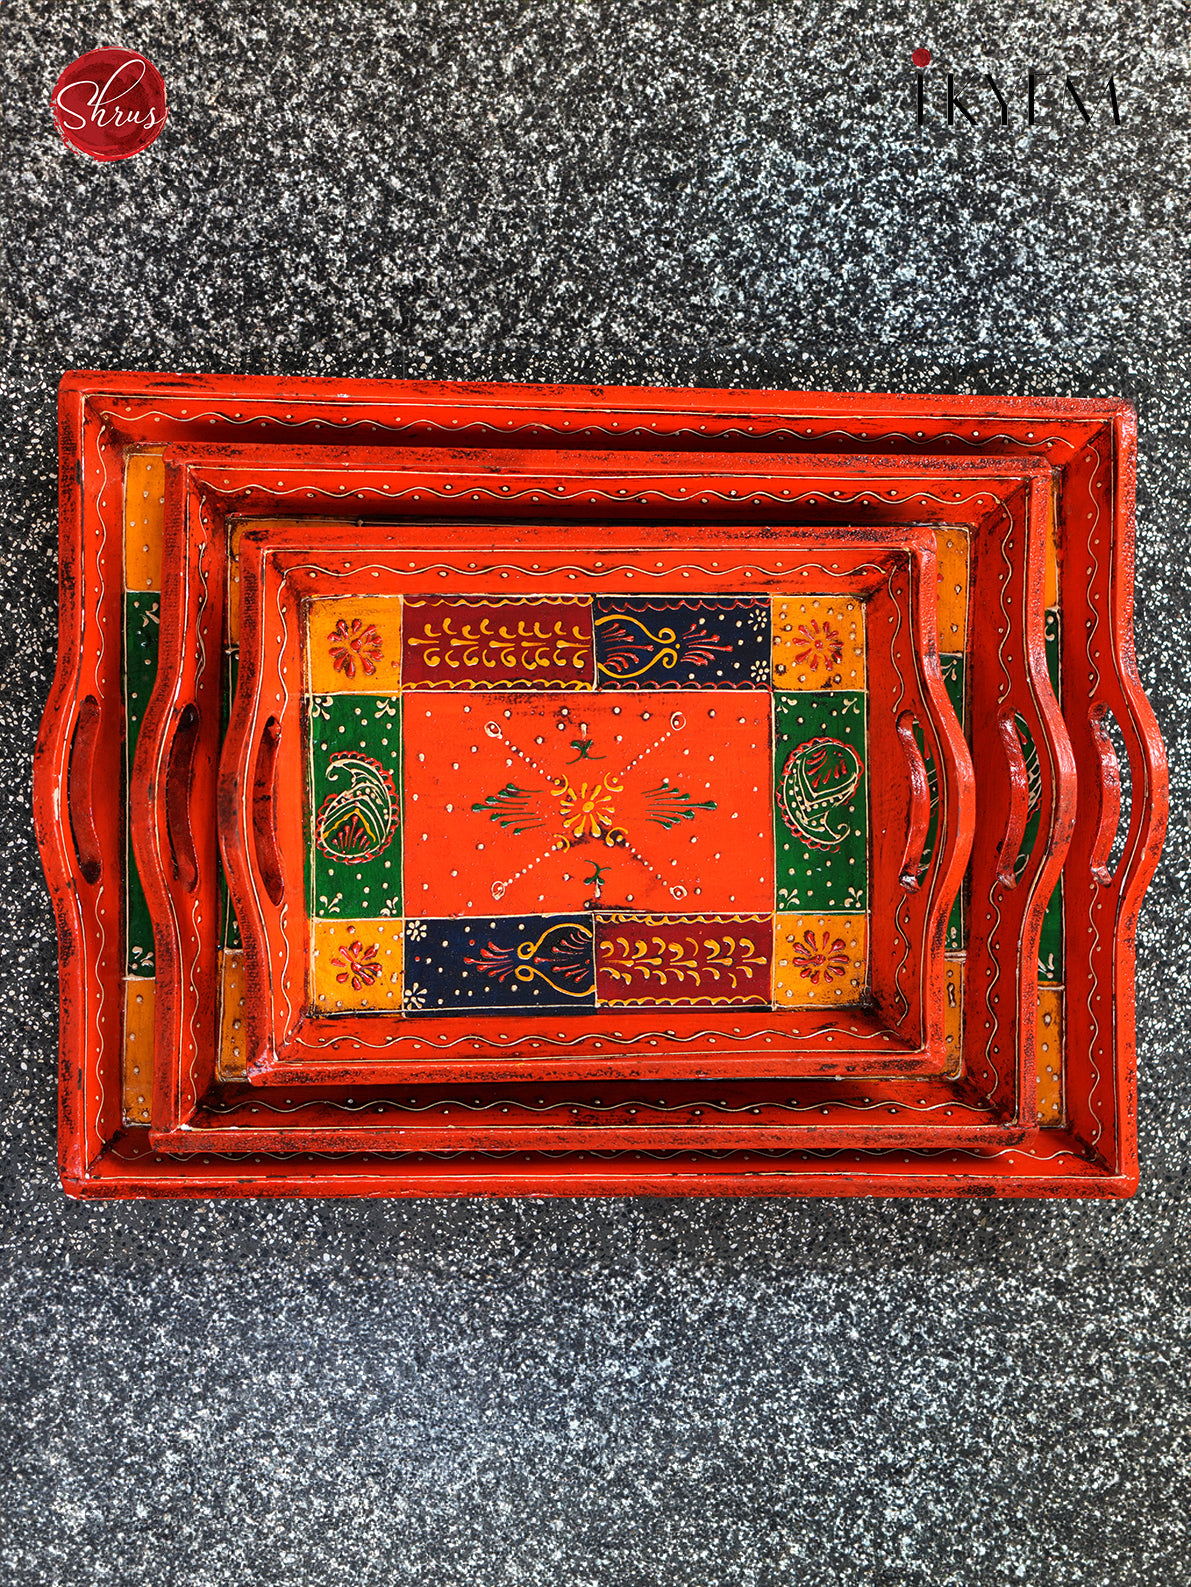 Hand painted wooden trays